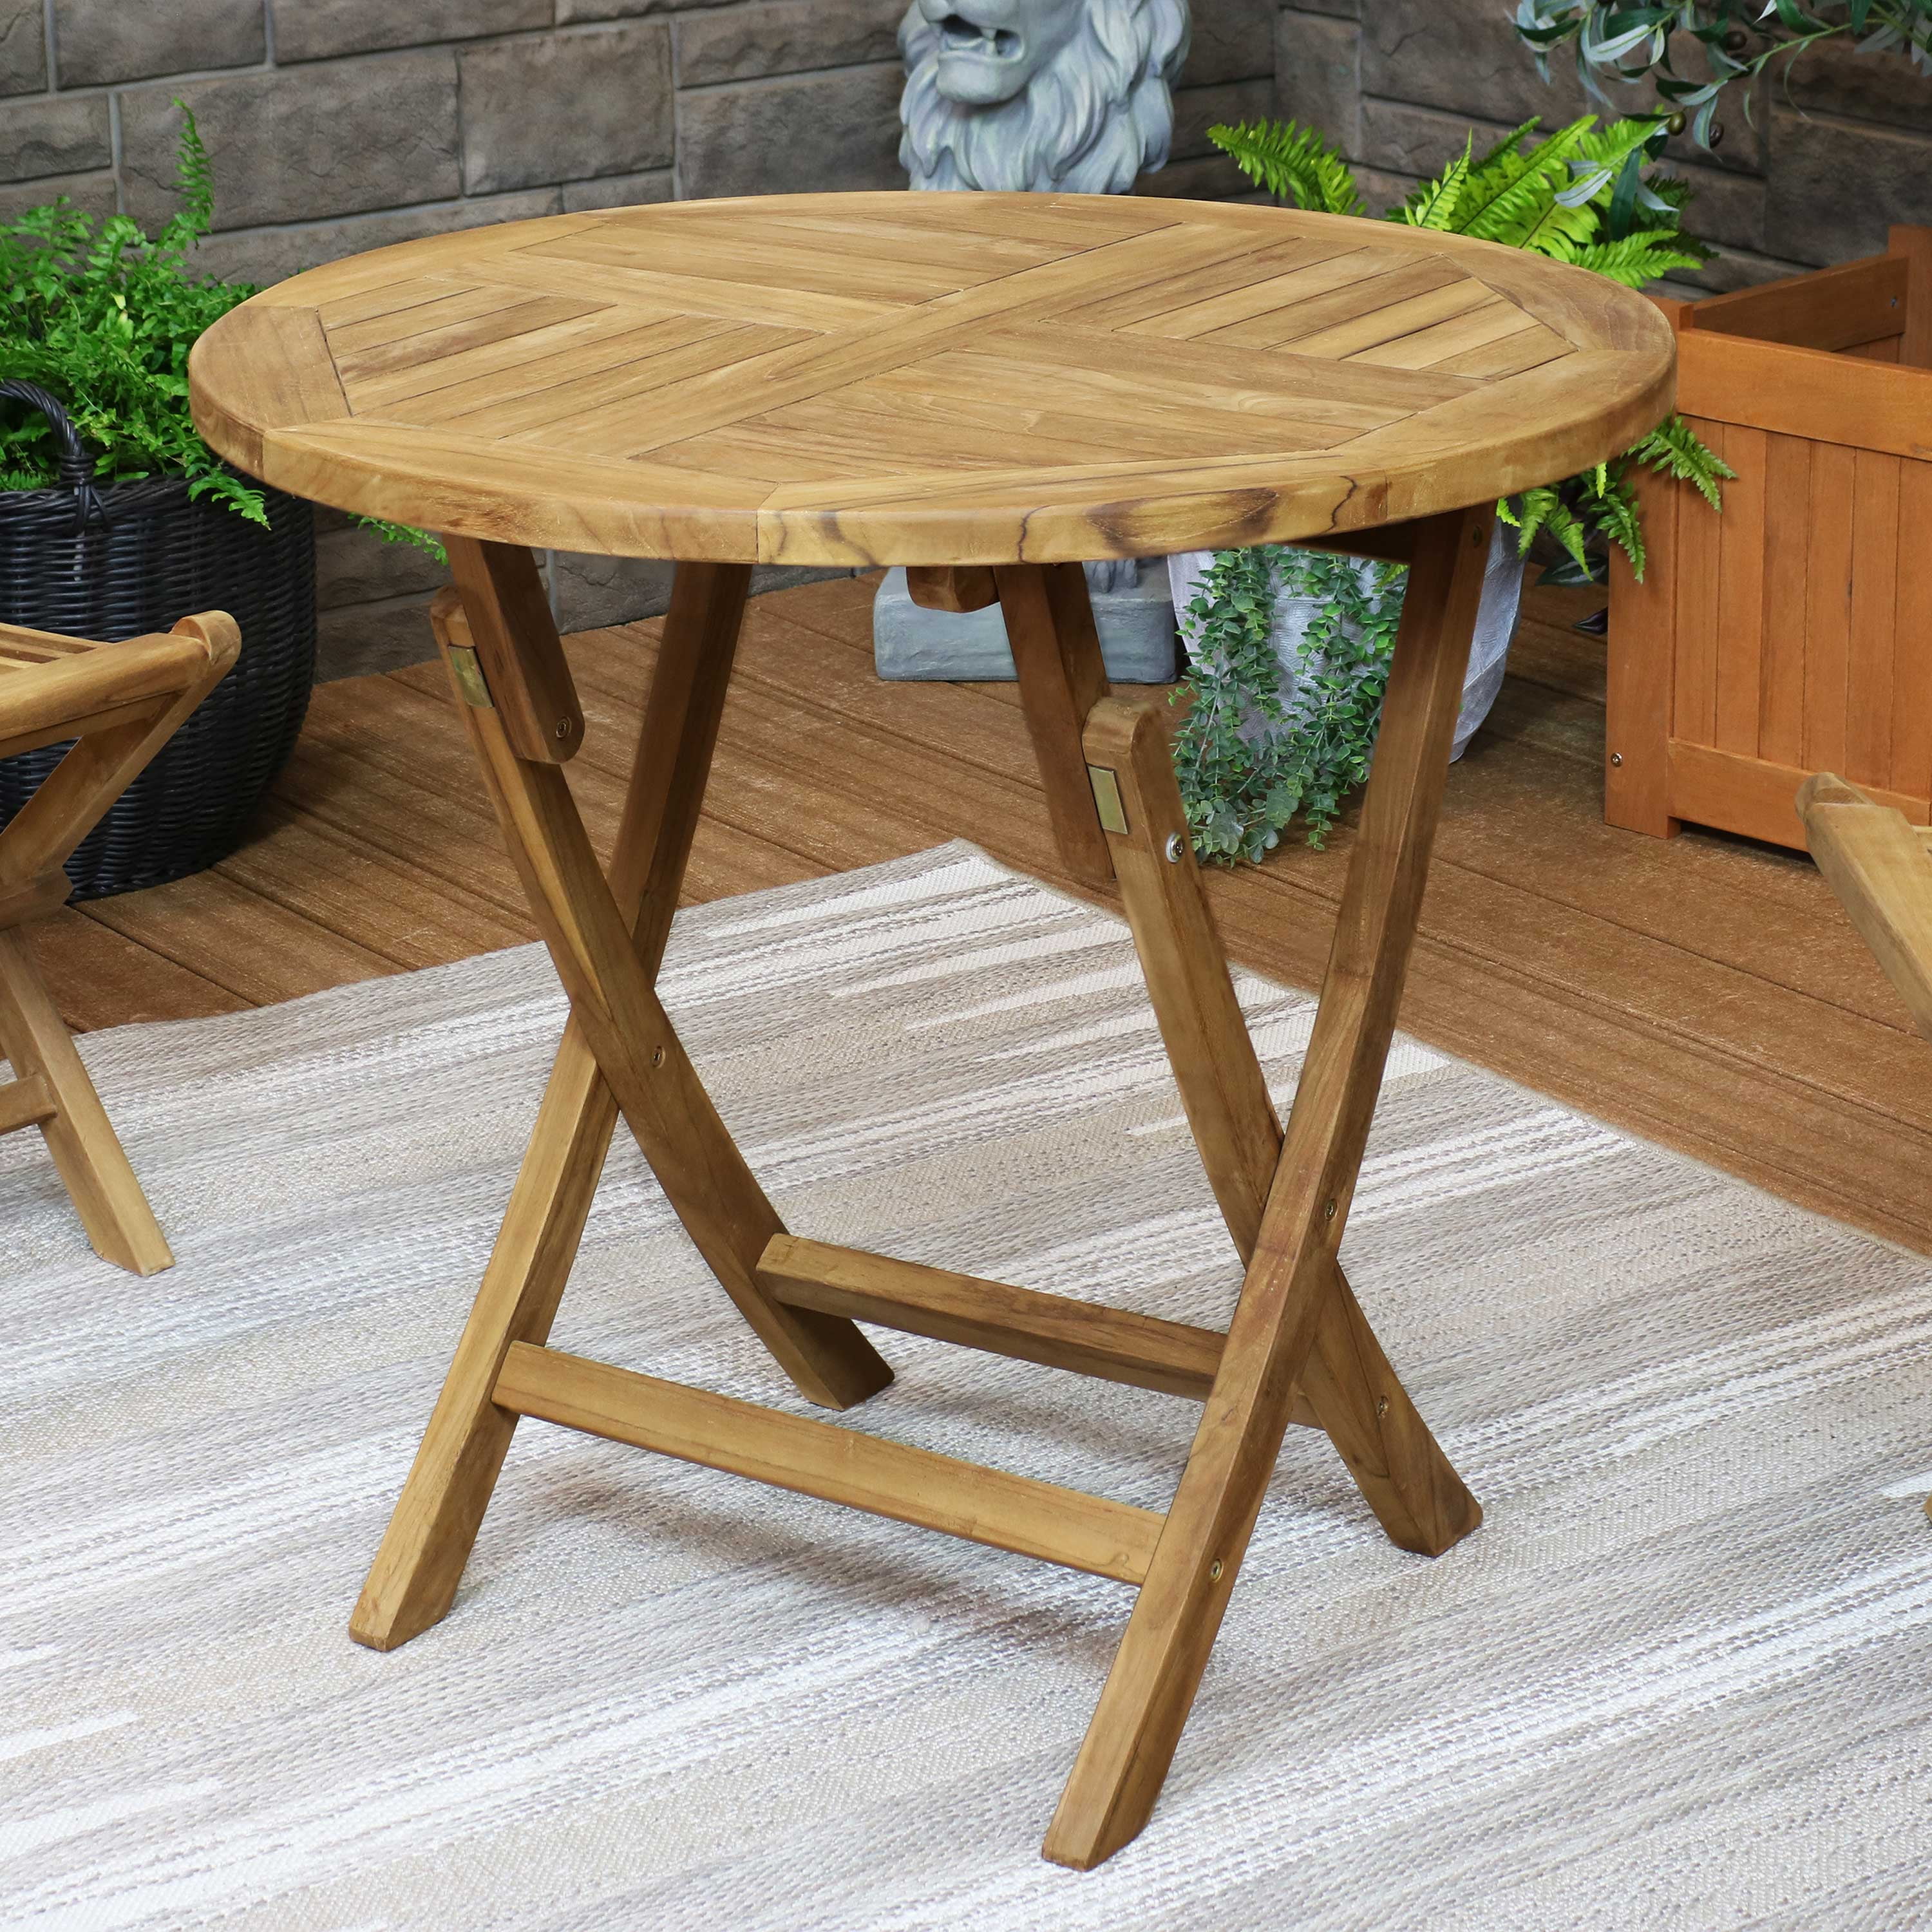 Teak Dining Table Suitable For Small Spaces: Compact And Functional